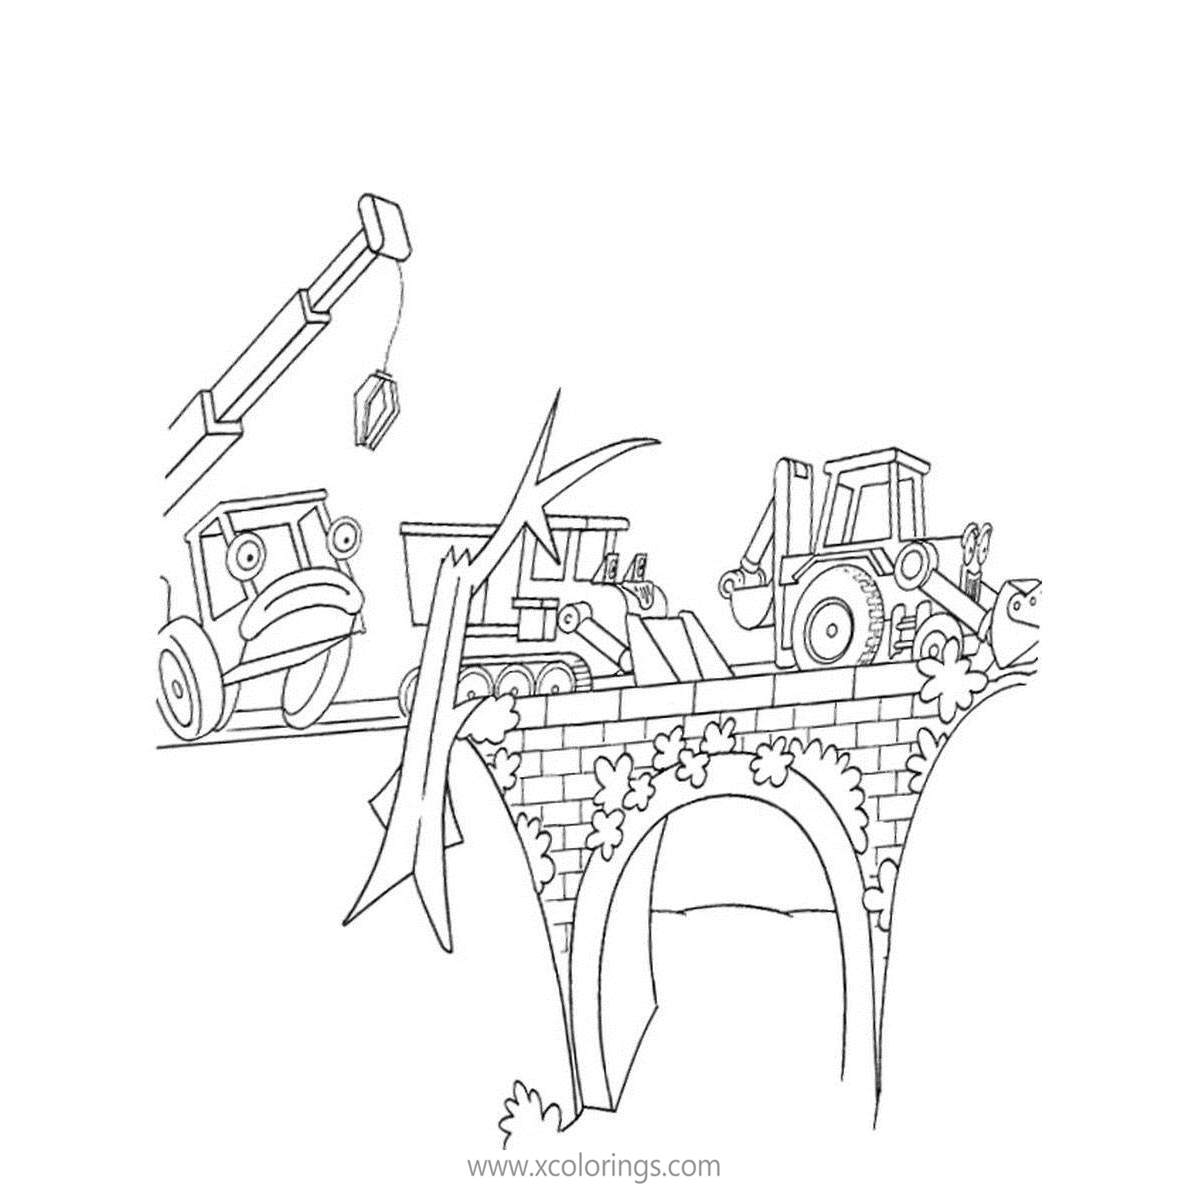 Bob The Builder Coloring Pages Machines are on the Bridge - XColorings.com